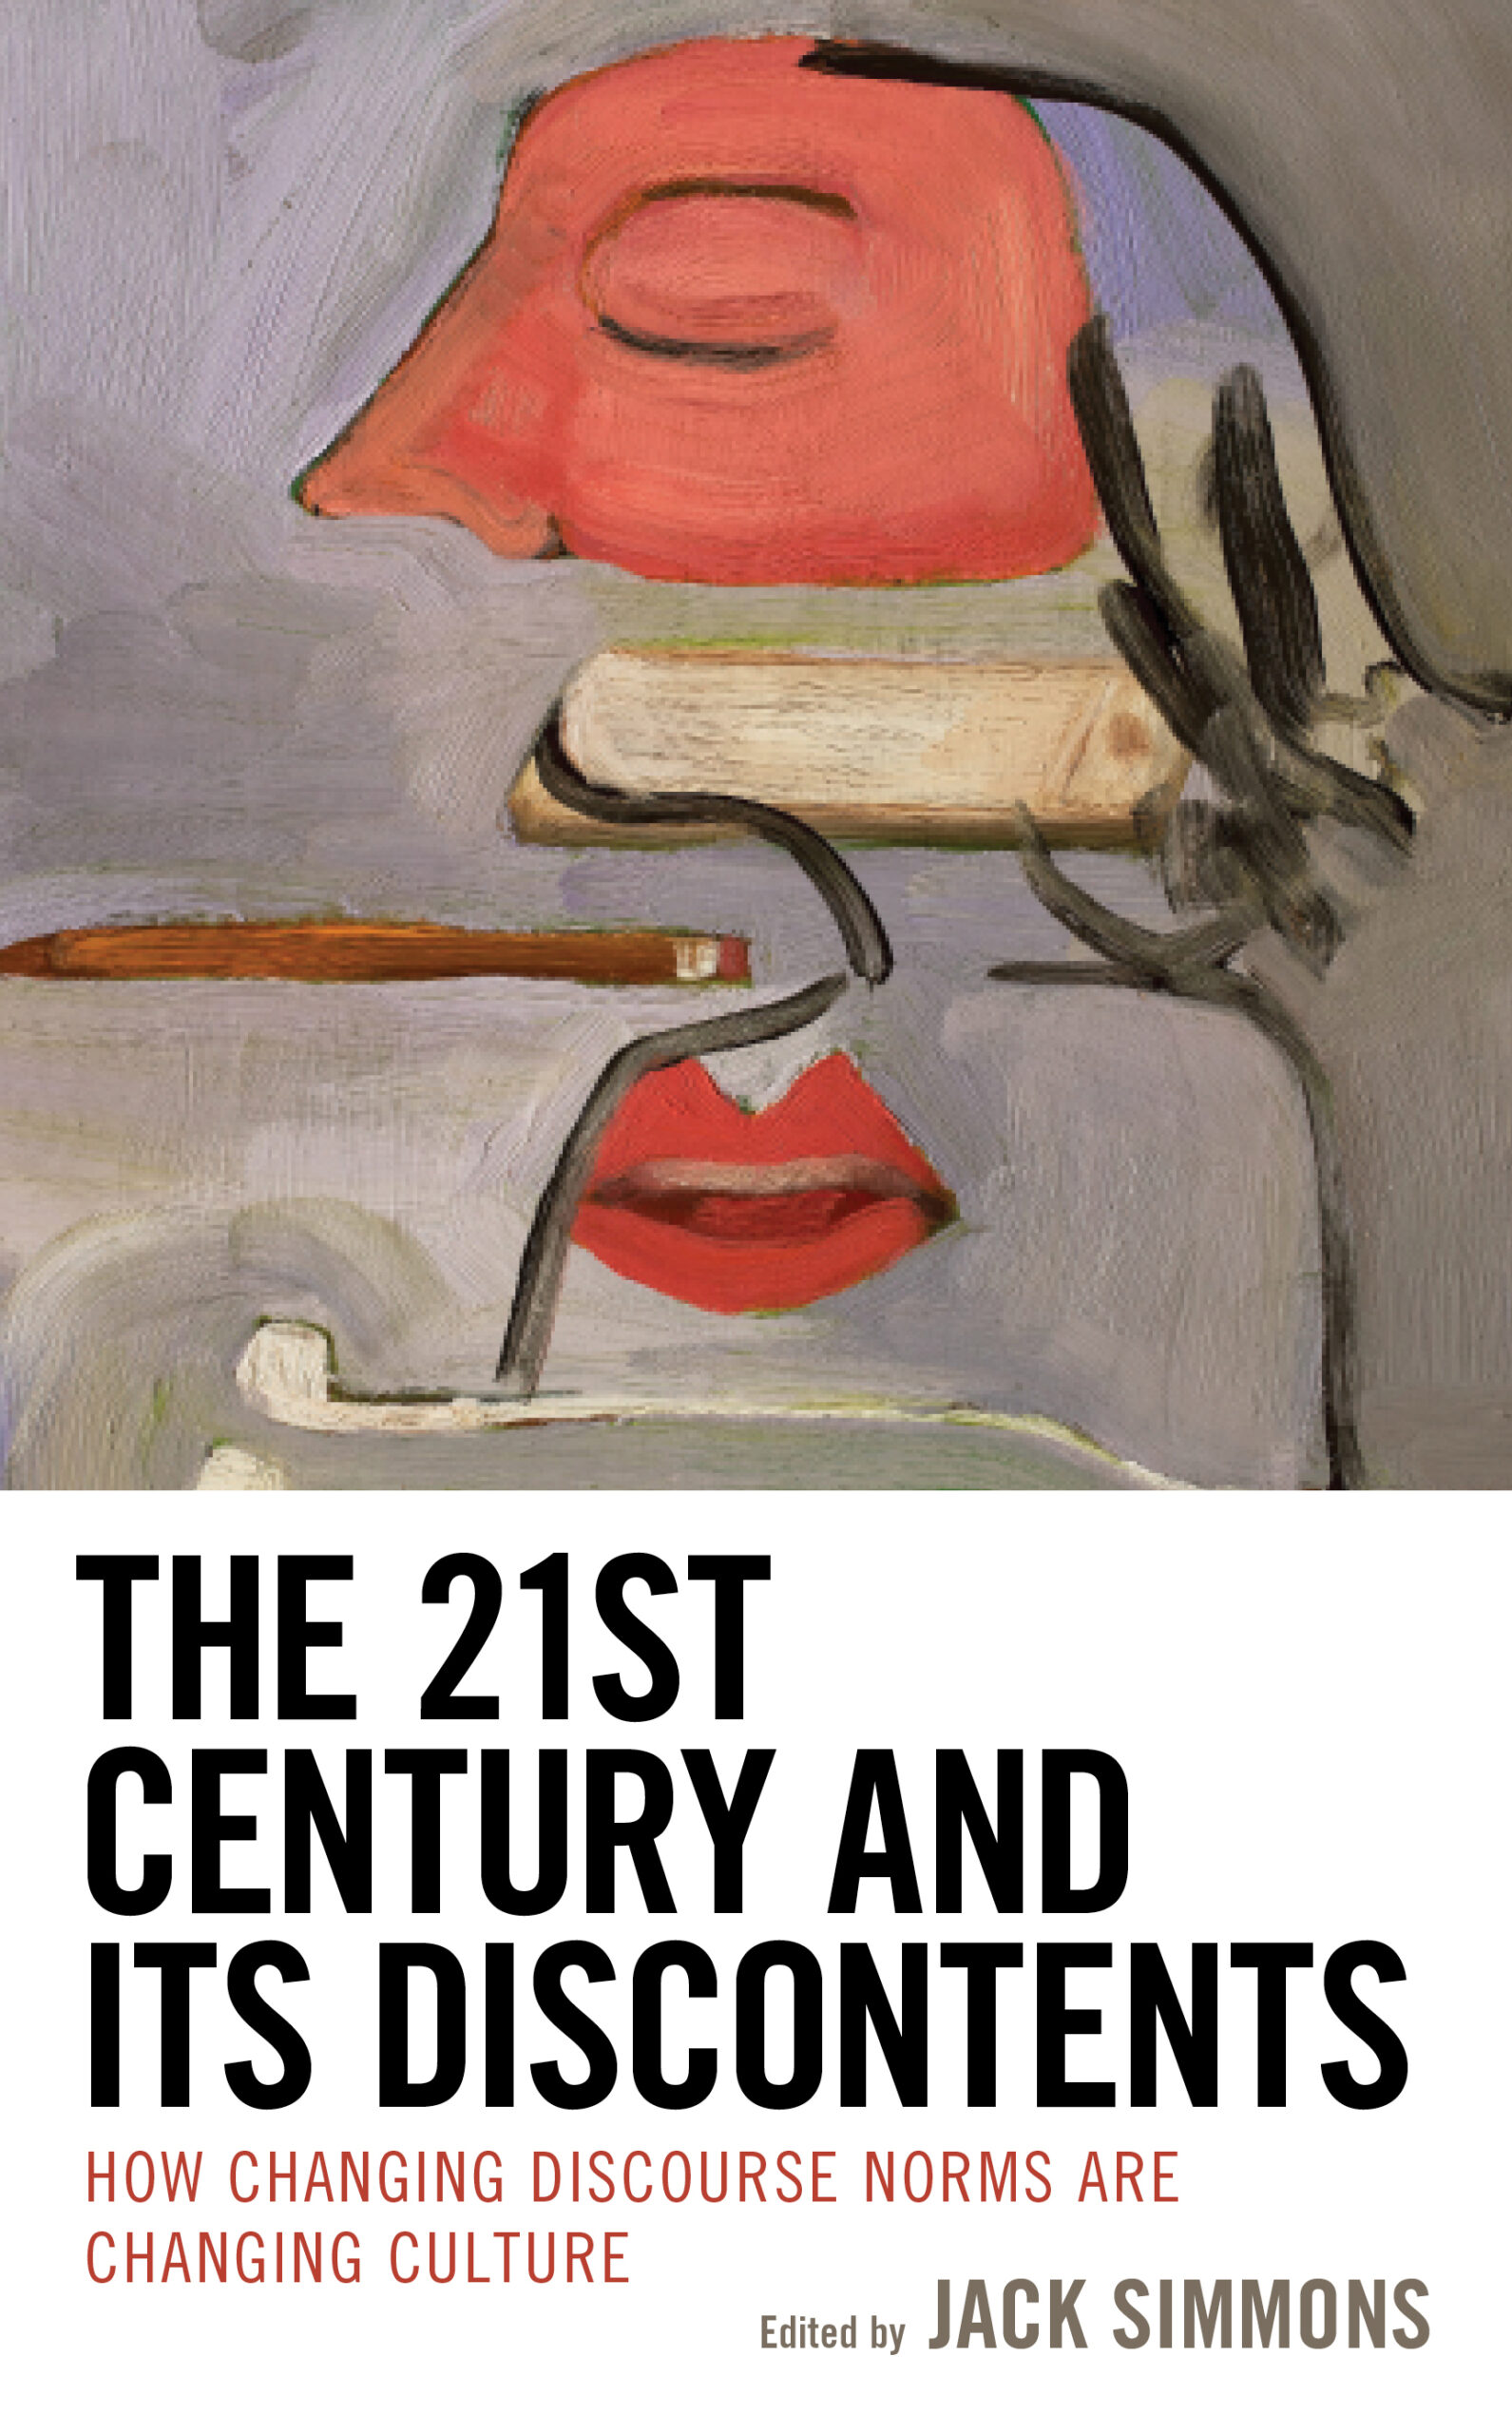 21st Century and Its Discontents, edited by Jack Simmons (in progress)